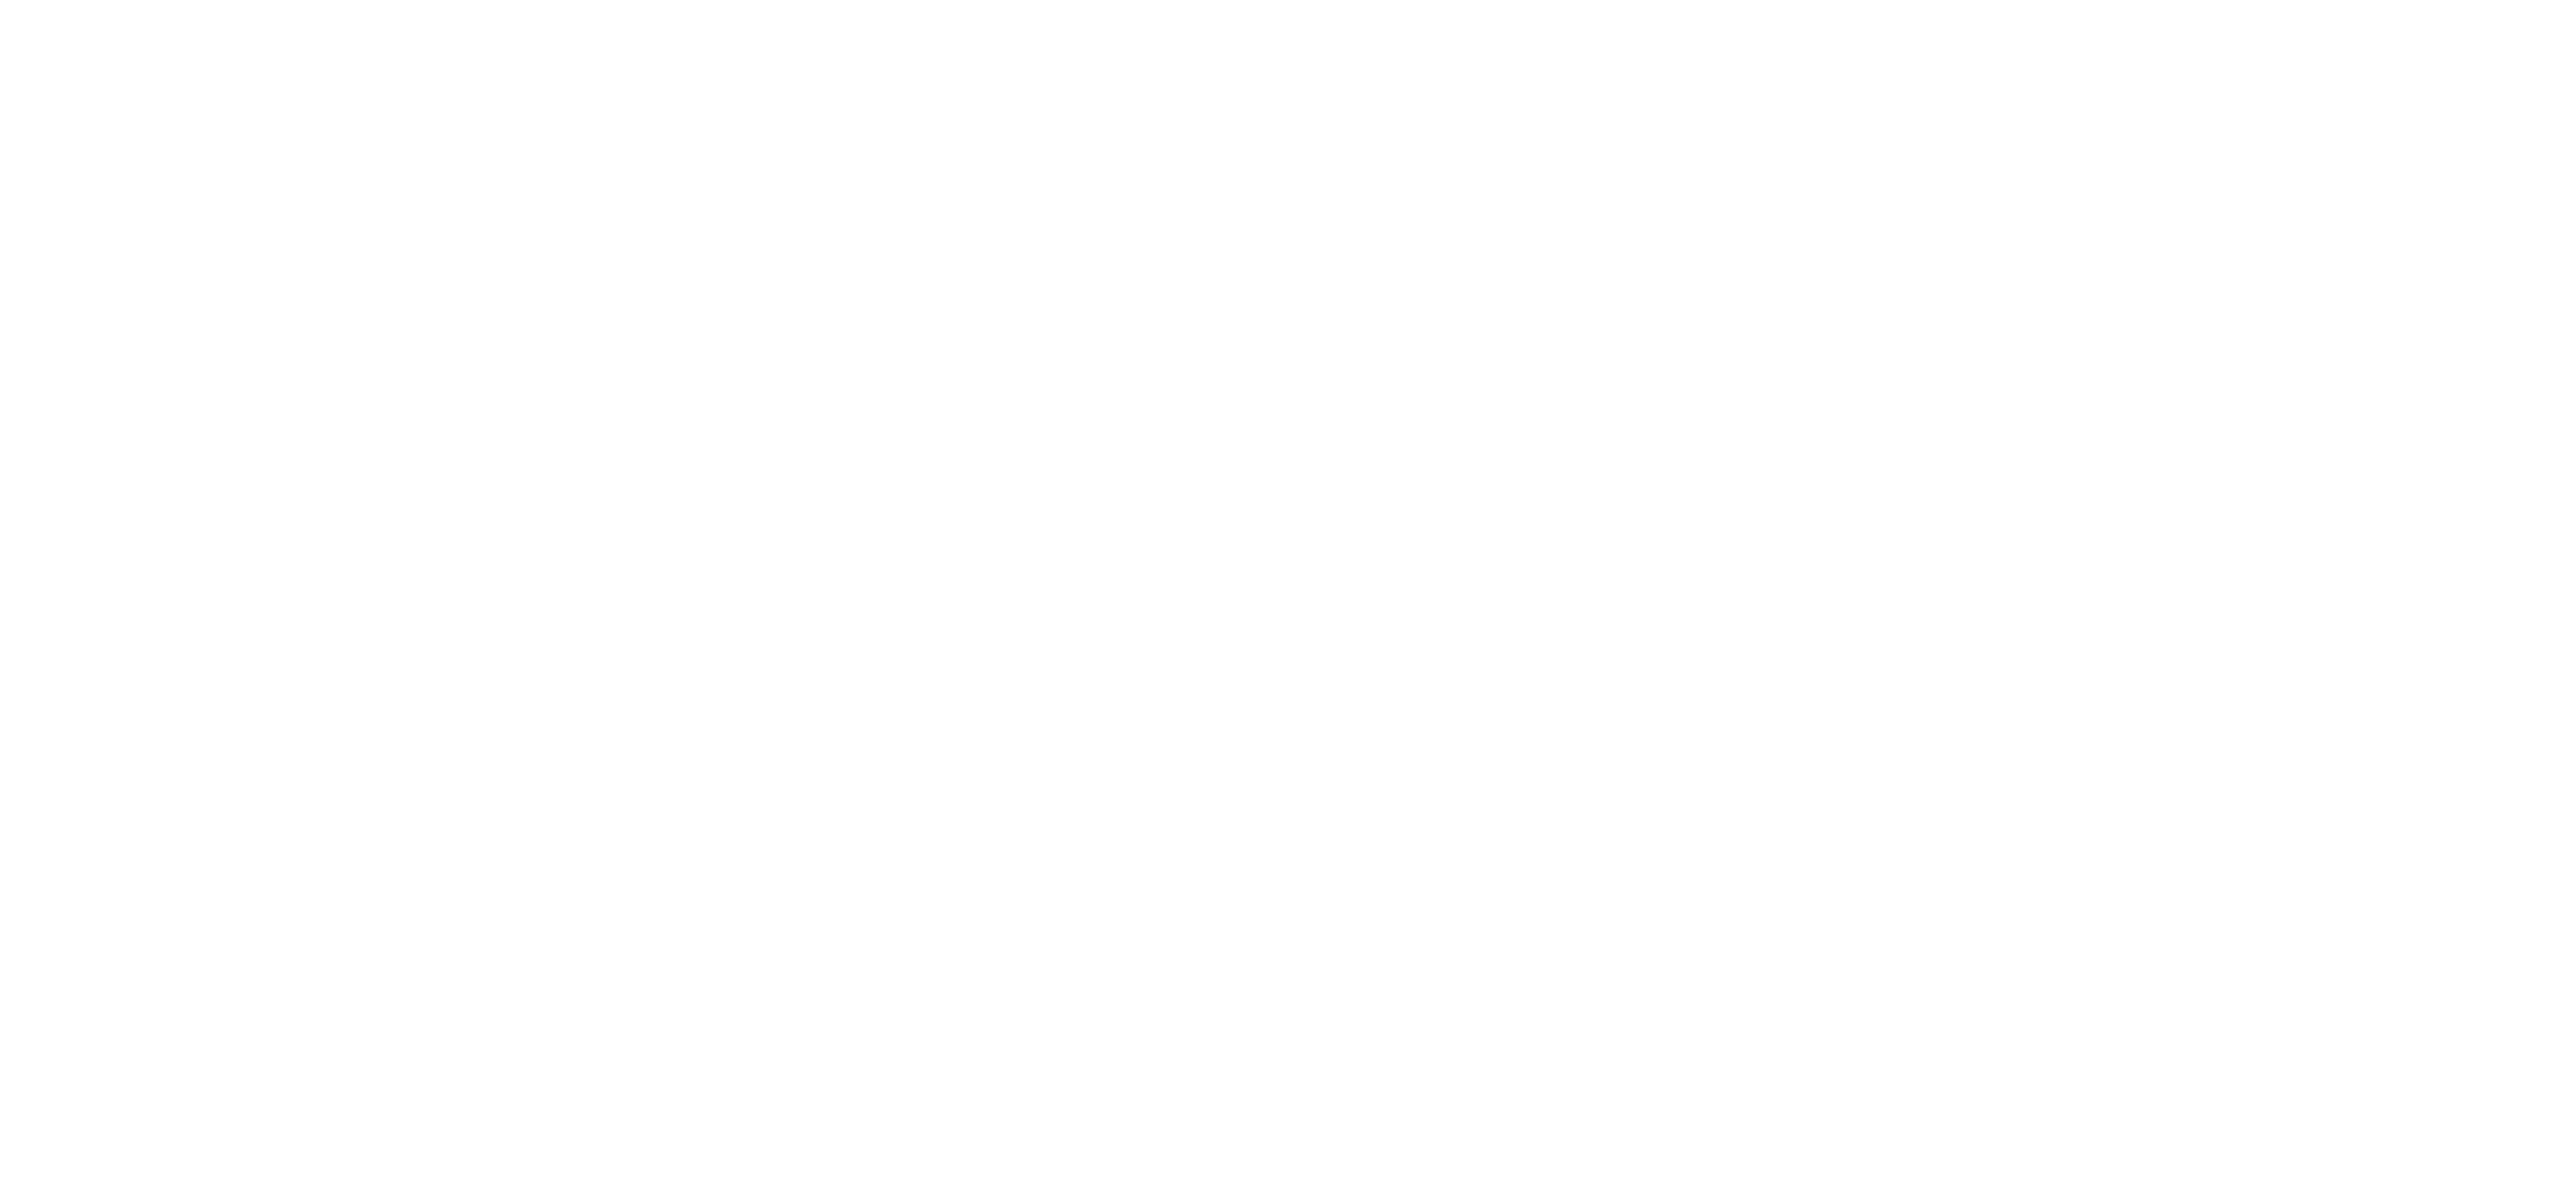 https://maroochy.org/wp-content/uploads/2021/09/SCC_2014_Linear_REV-70_GRANTS_Proudly-supported-by-01.png